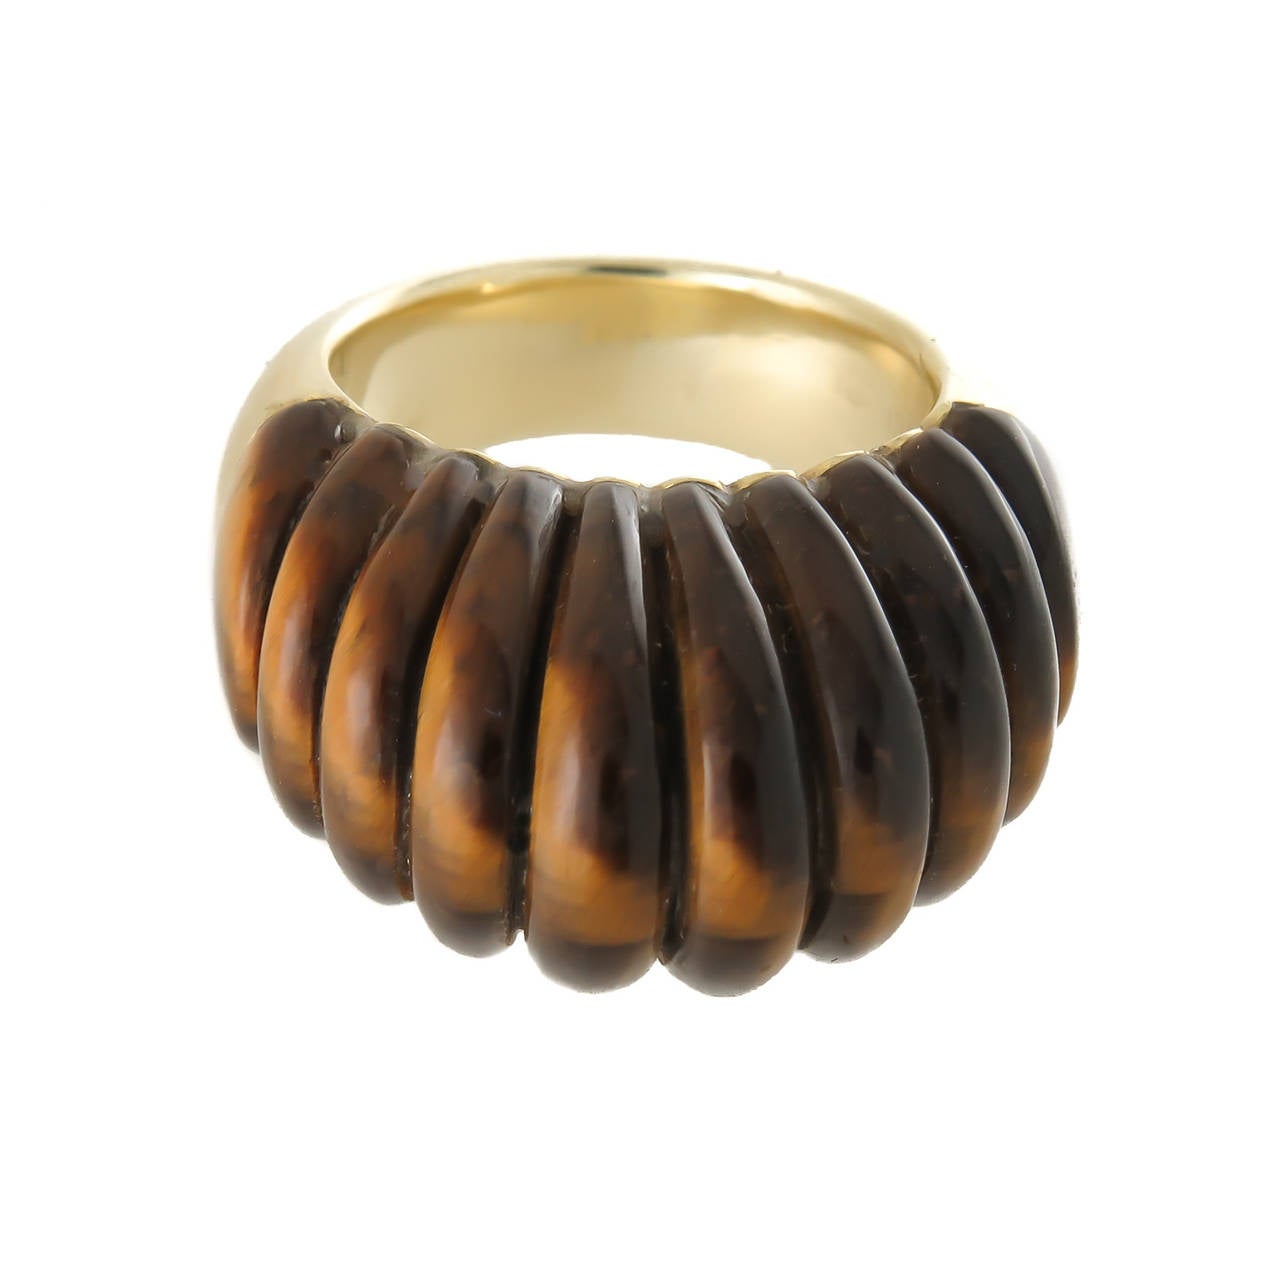 Circa 1970s 18K Yellow Gold Ring by Gucci, the top being a solid piece of Scalloped Tigers Eye in a high dome. Top measurements 1 inch across and 3/4 inch high.  Finger size = 5